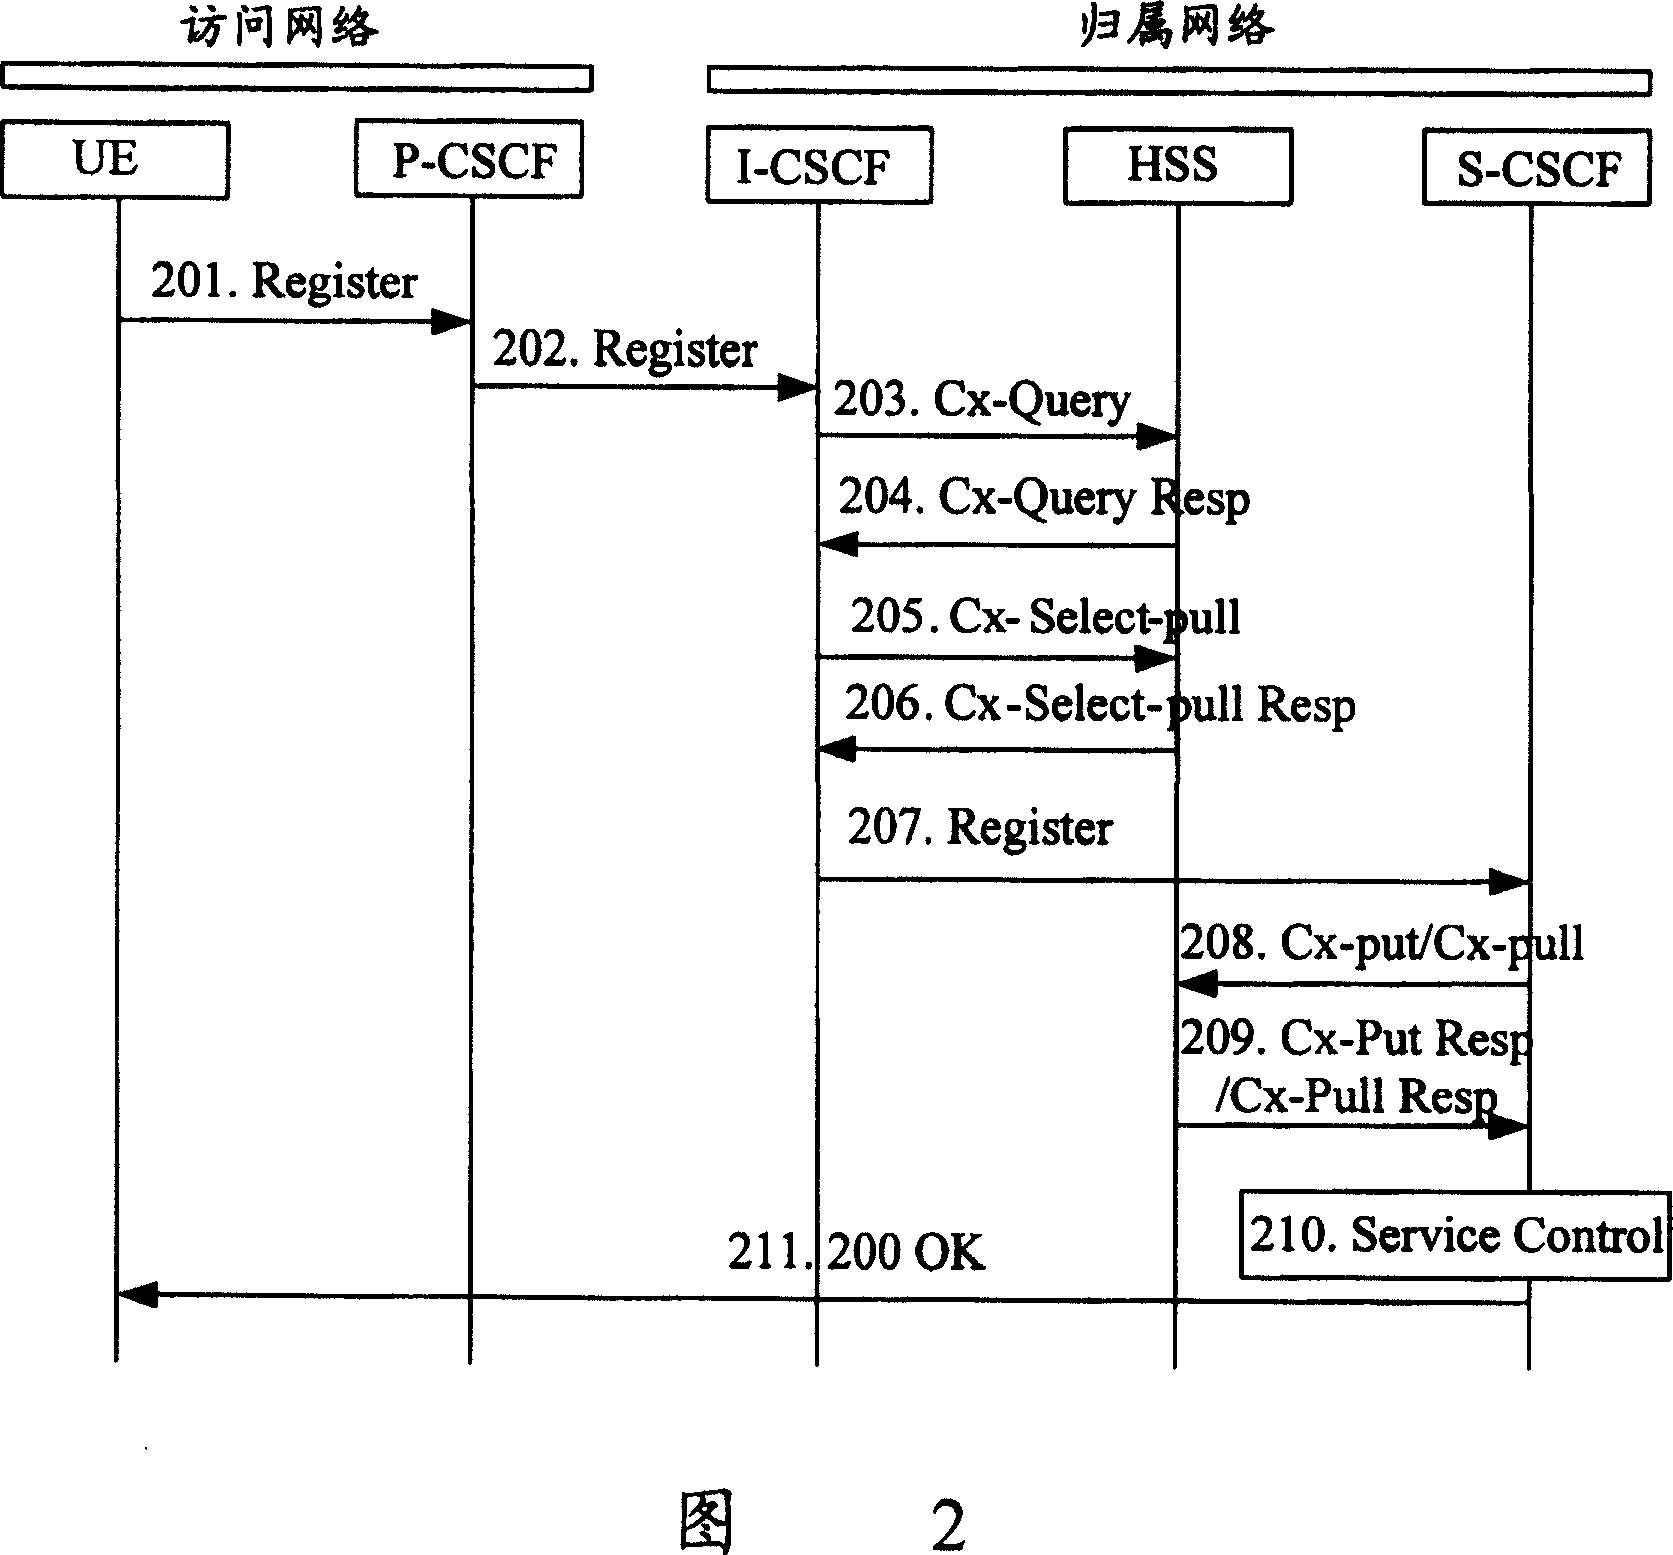 Method for abating interface loads of Home Subscriber Servers (HSS)